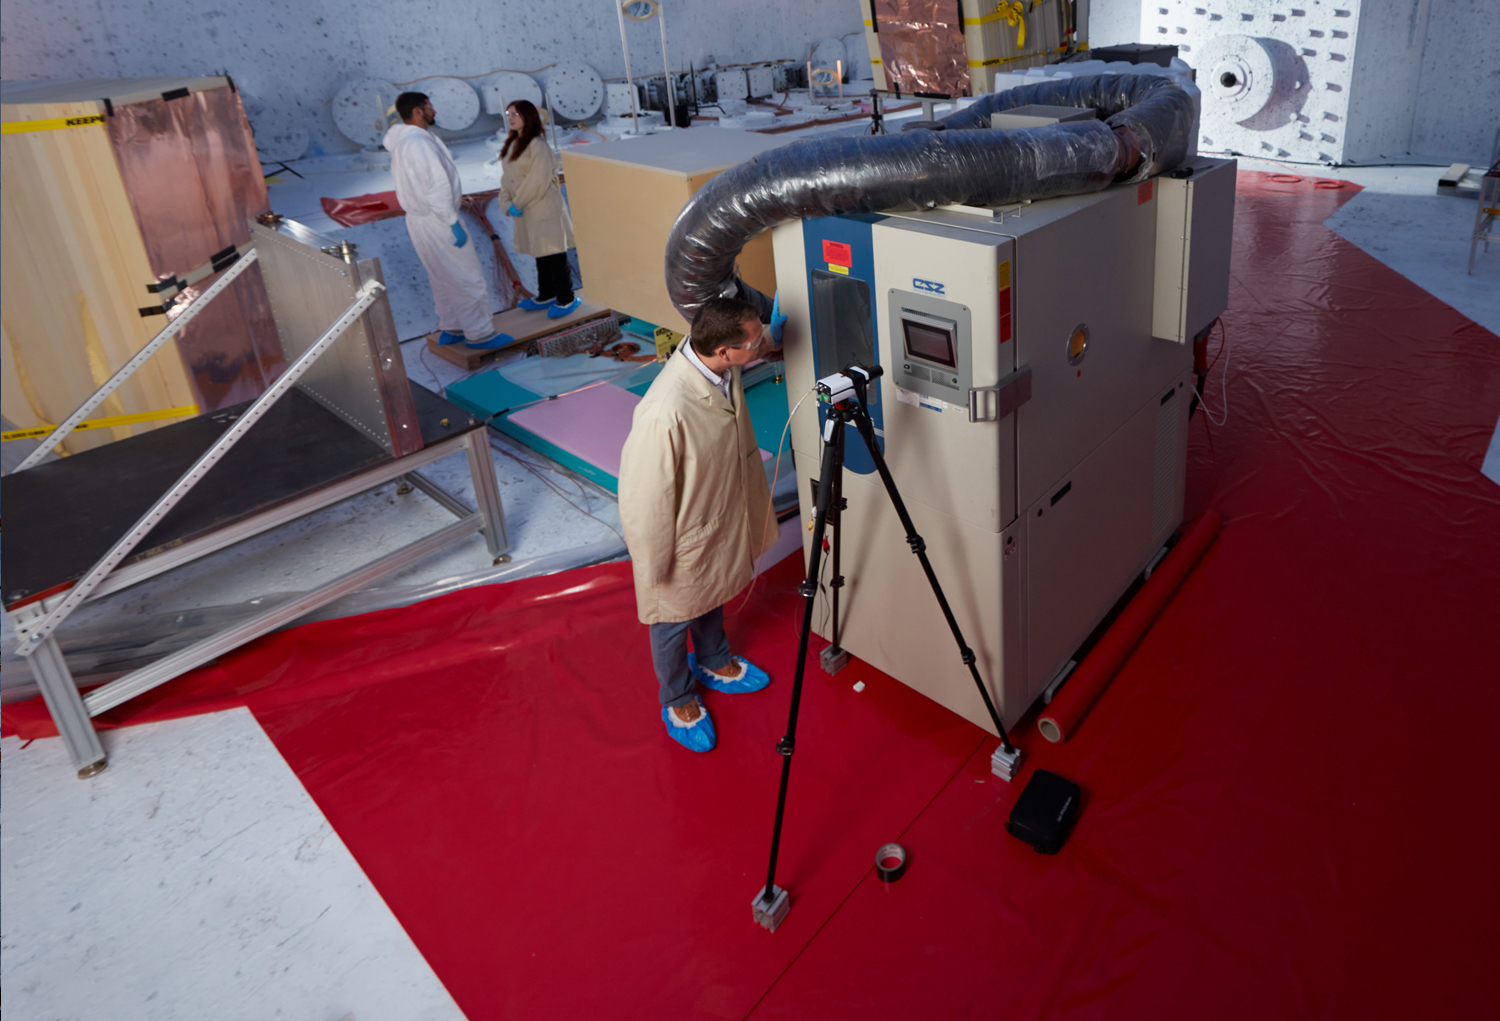 left: Scientists in a concrete room inspecting mirrors; right: A scientist inspects a large cubic machine in a concrete room.